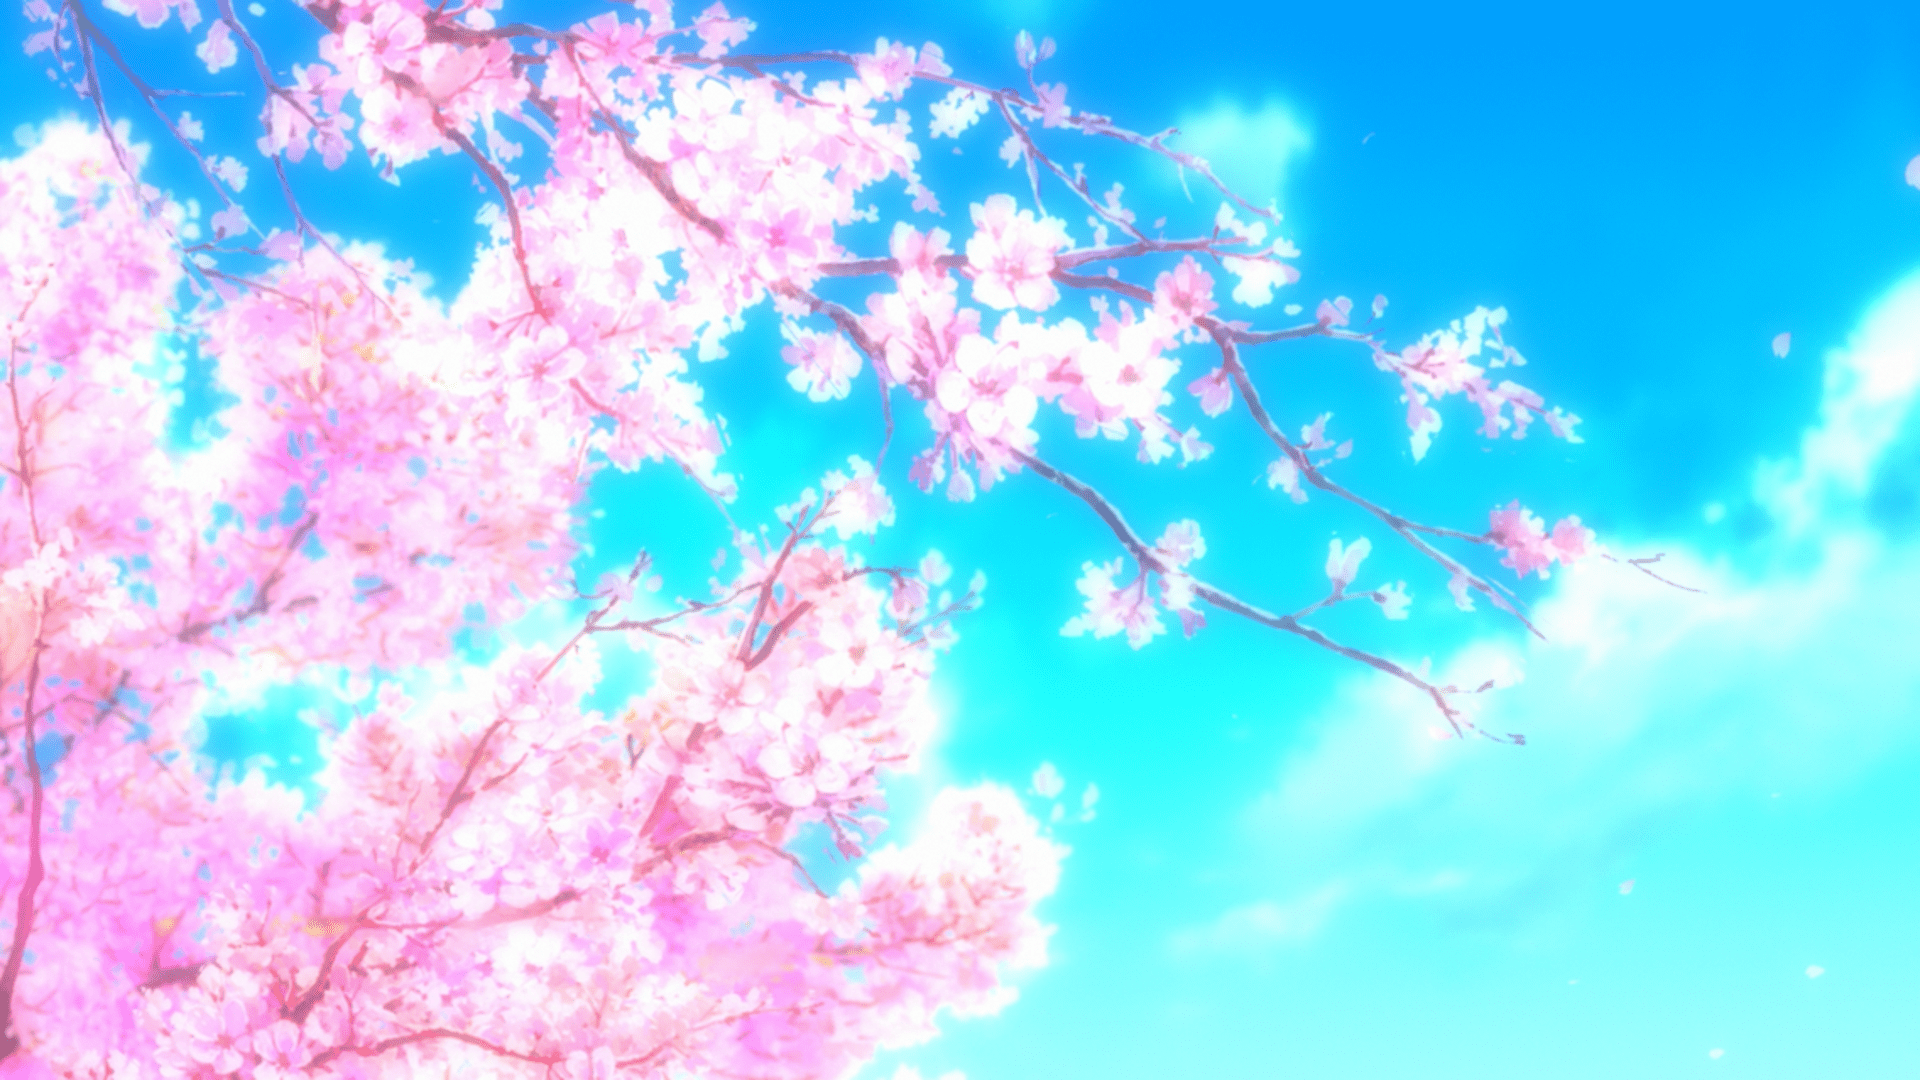 Sakura Trees Anime Aesthetic : 367 Images About Cherry Blossom On We